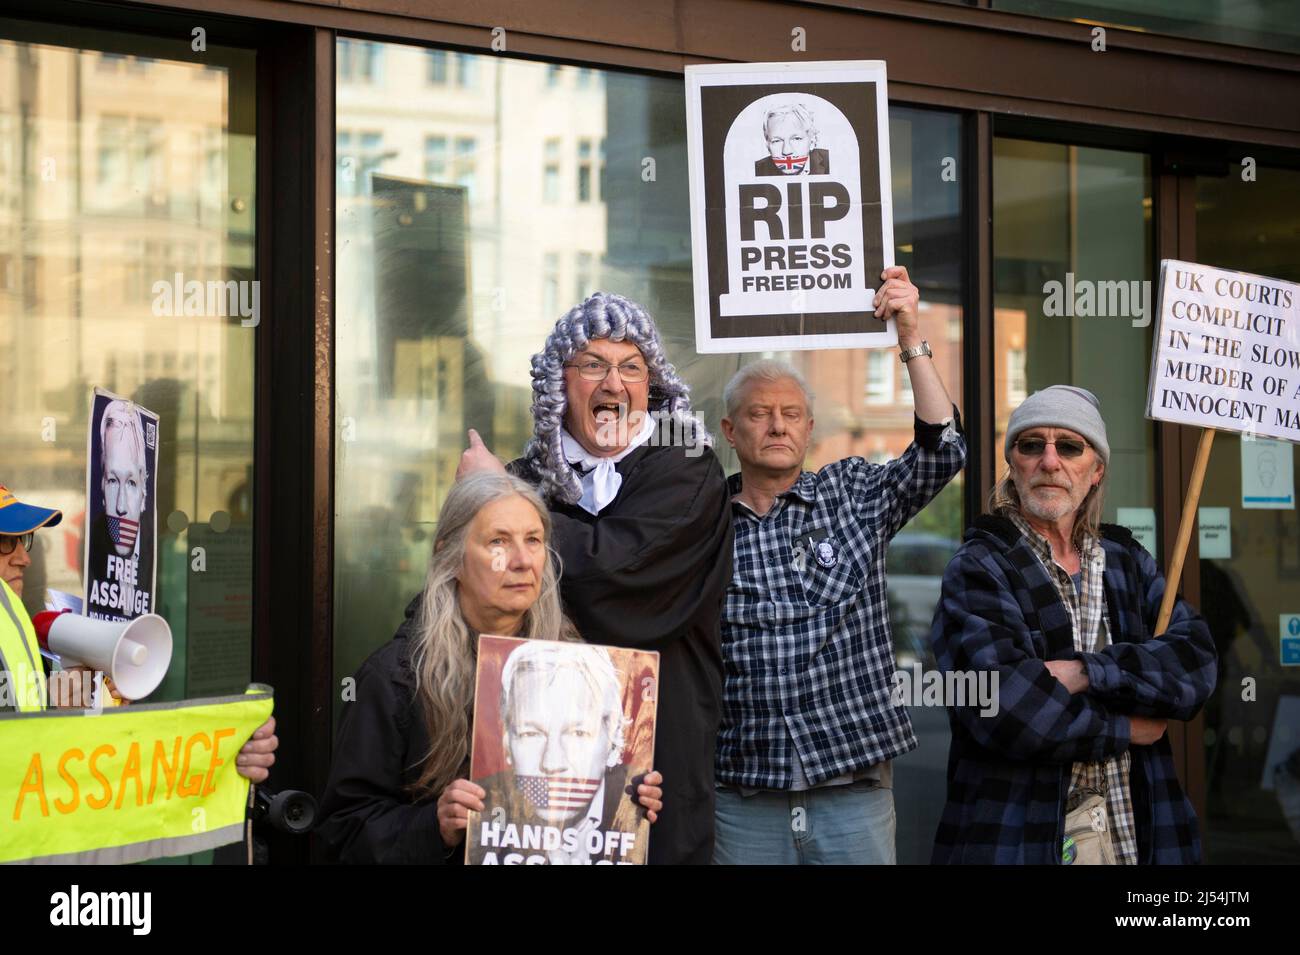 London, UK, London, UK. 20th Apr, 2022. Supporters of WikiLeaks Co-founder Julian Assange outside Westminister Magistrates Court following formal approval for the extradition of Julian Assange to the US on espionage charges, a decision to be made by the UK home secretary, Priti Patel. Credit: claire doherty/Alamy Live News Stock Photo